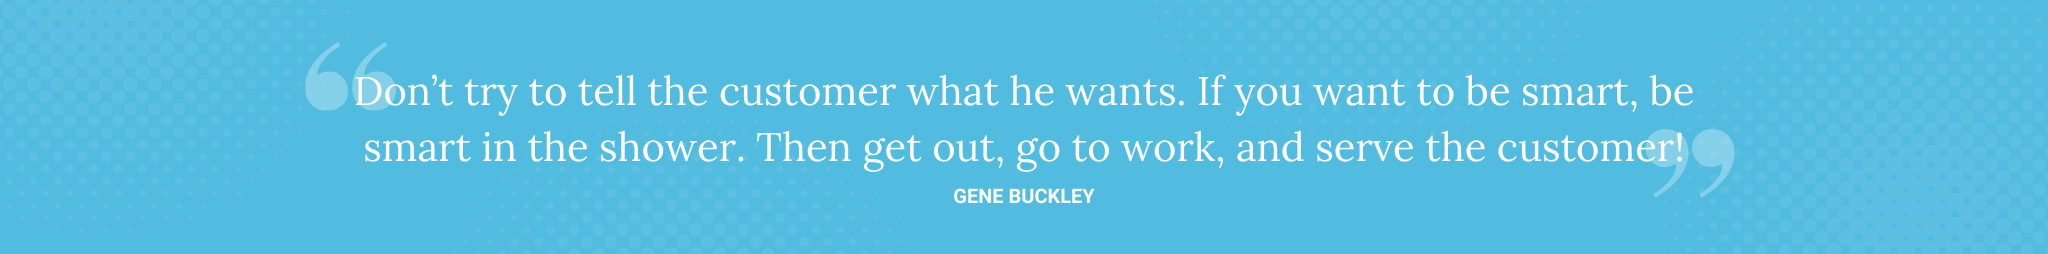 Gene Buckley Quote for 50 Customer Service Stats Quotes and Facts - Brittany Hodak